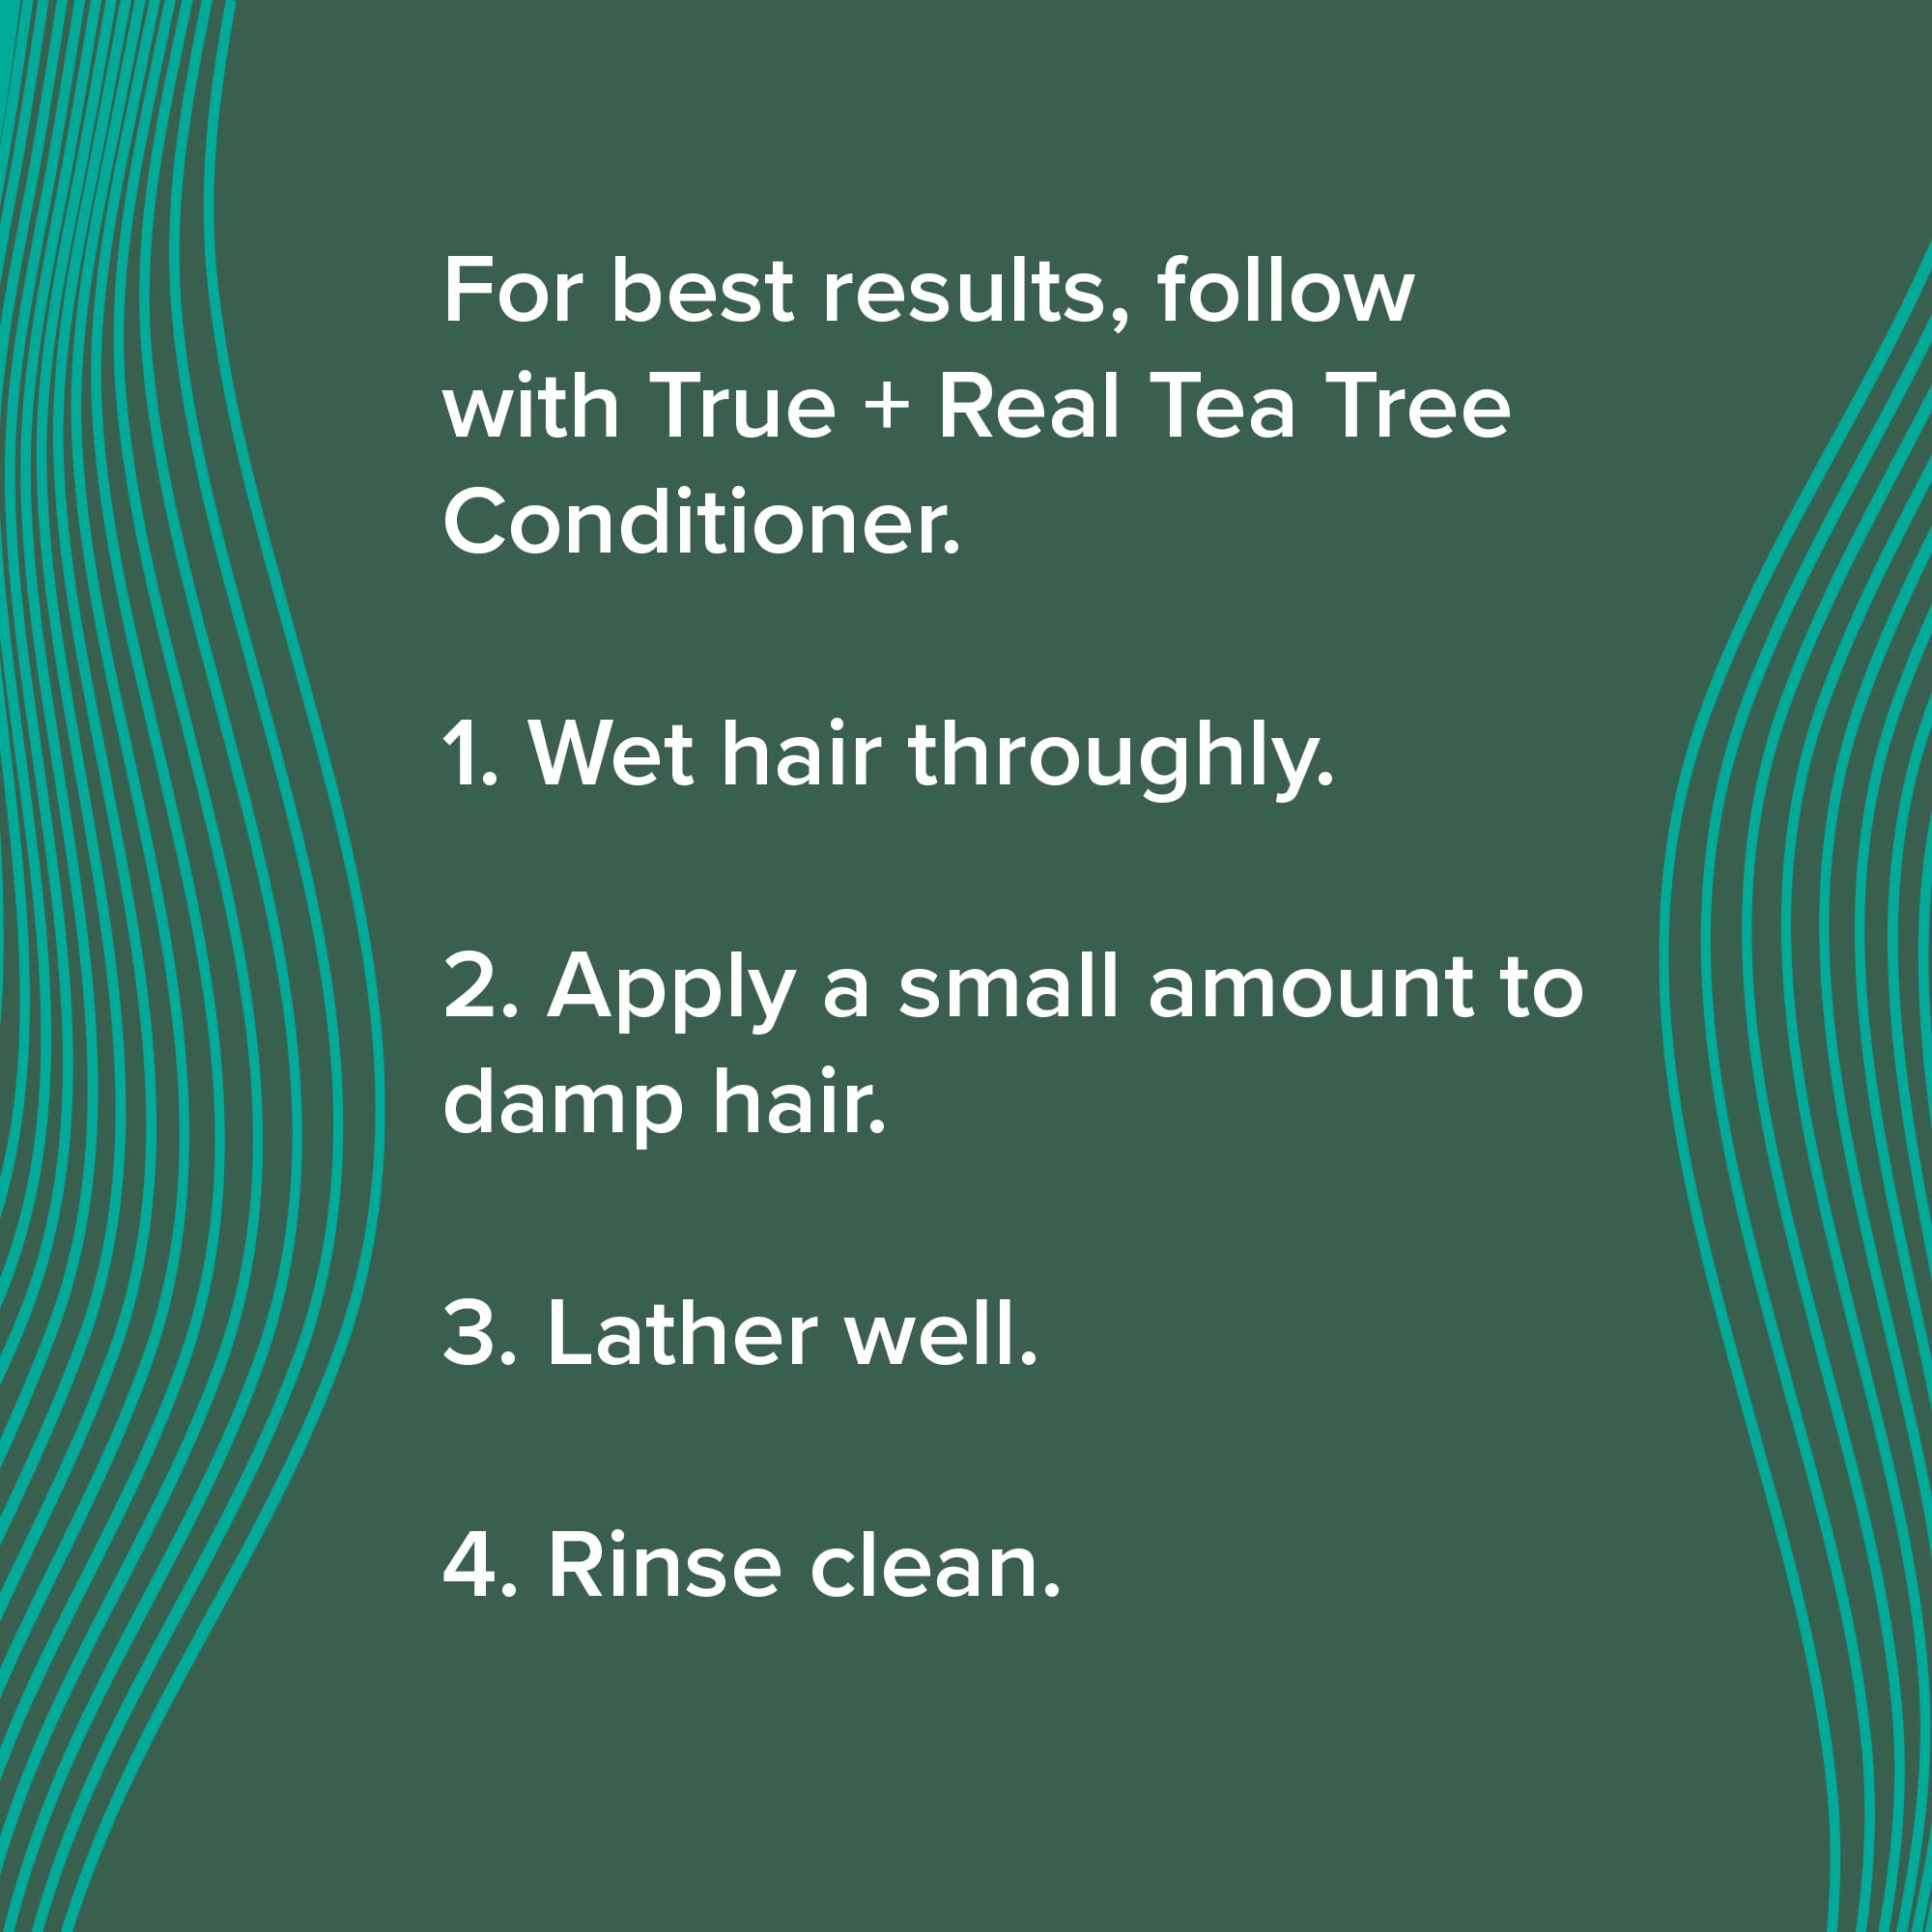 True+Real Tea Tree Shampoo, Invigorating Deep Clean Scalp Care, Refreshing Mint Scent, For All Hair Types, 10.14 oz